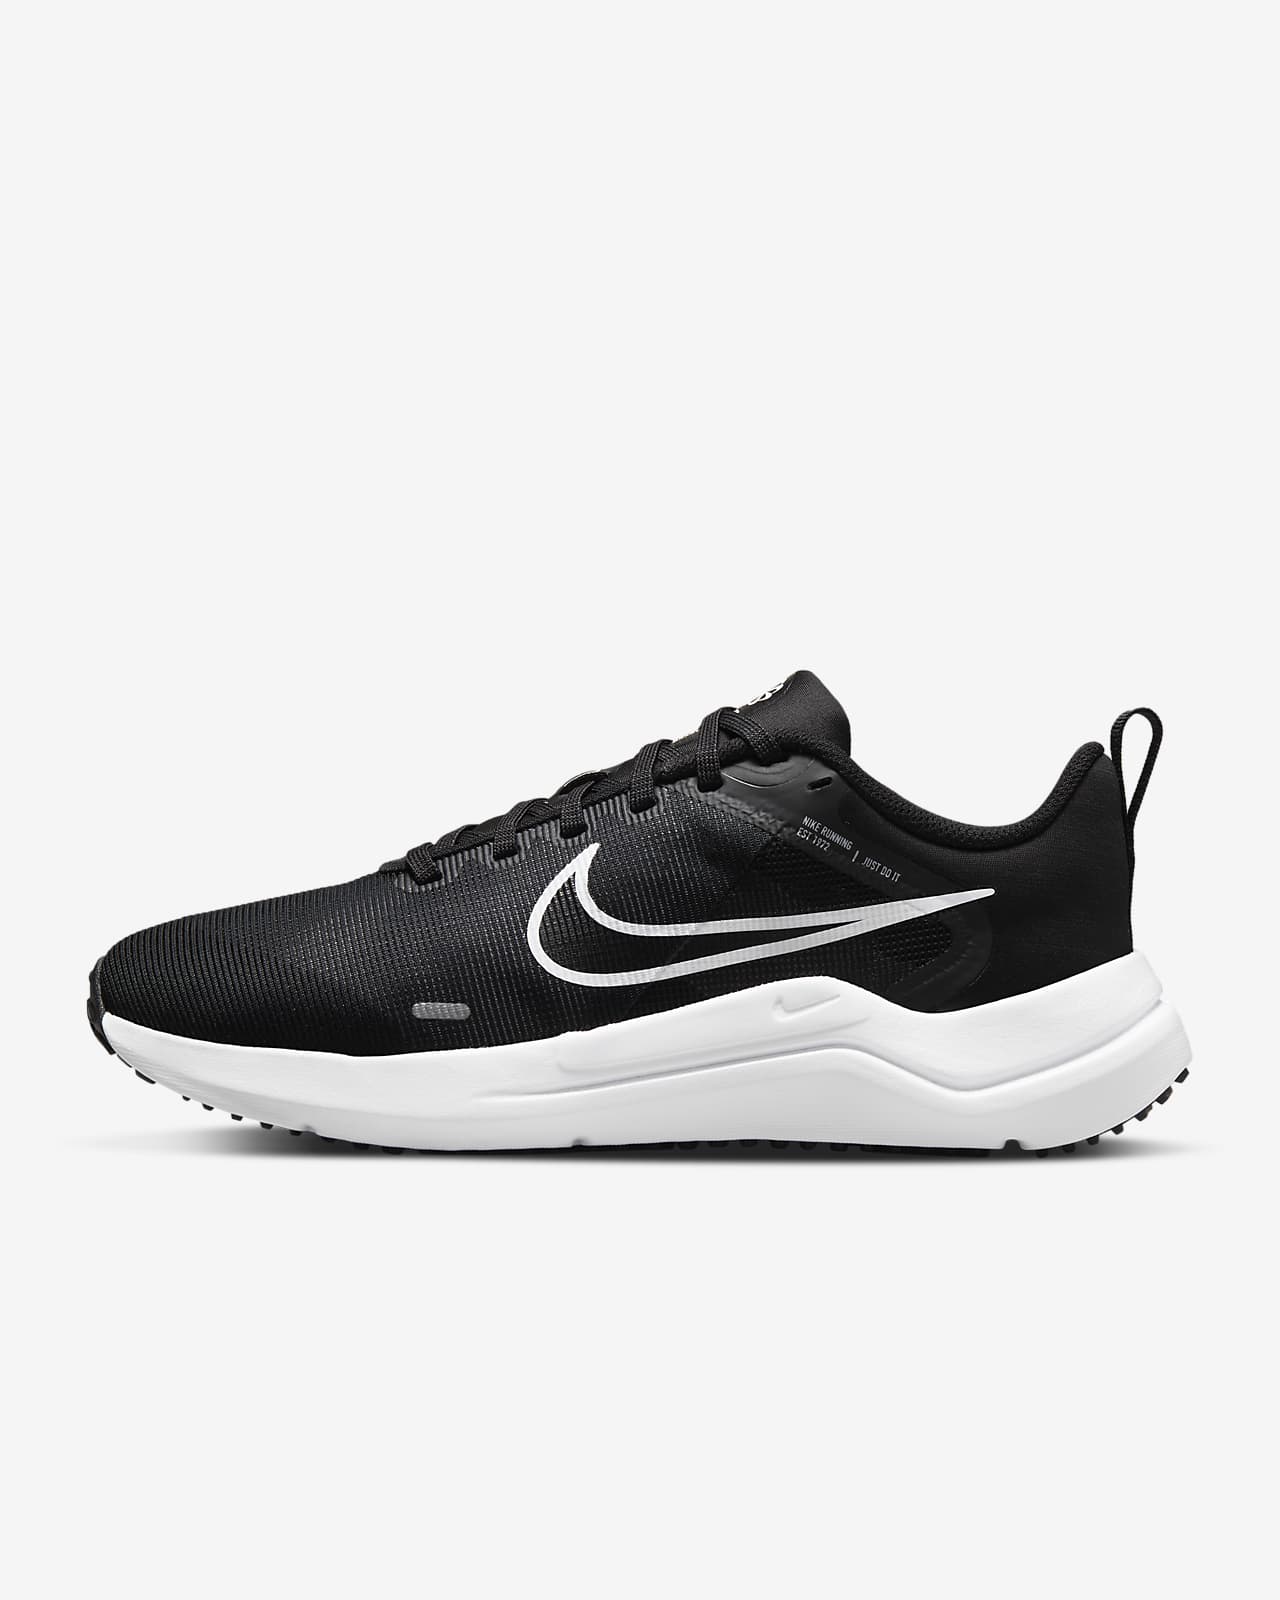 Downshifter Road Running Shoes (Wide). Nike.com